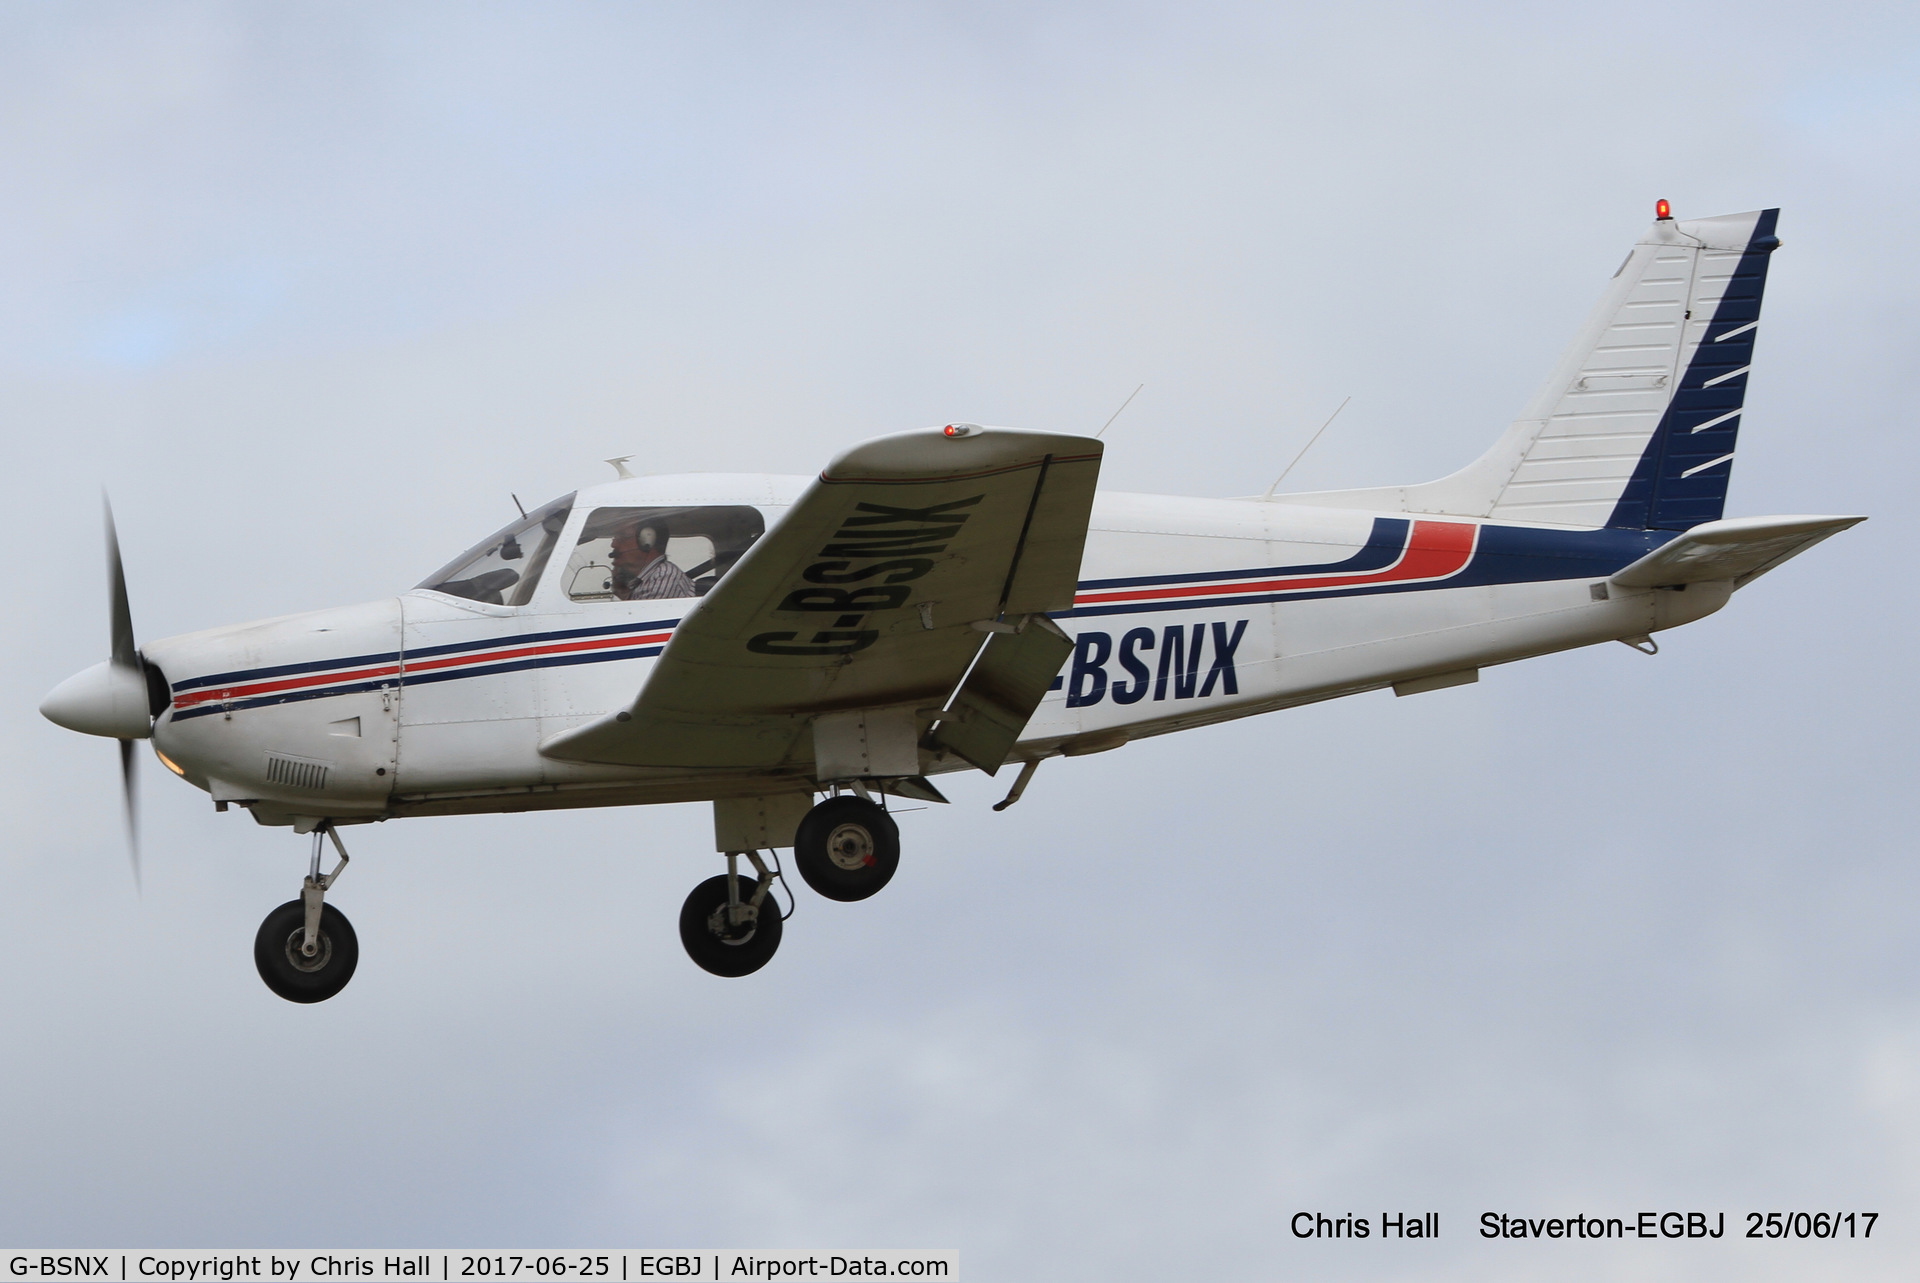 G-BSNX, 1979 Piper PA-28-181 Cherokee Archer II C/N 28-7990311, Project Propeller at Staverton